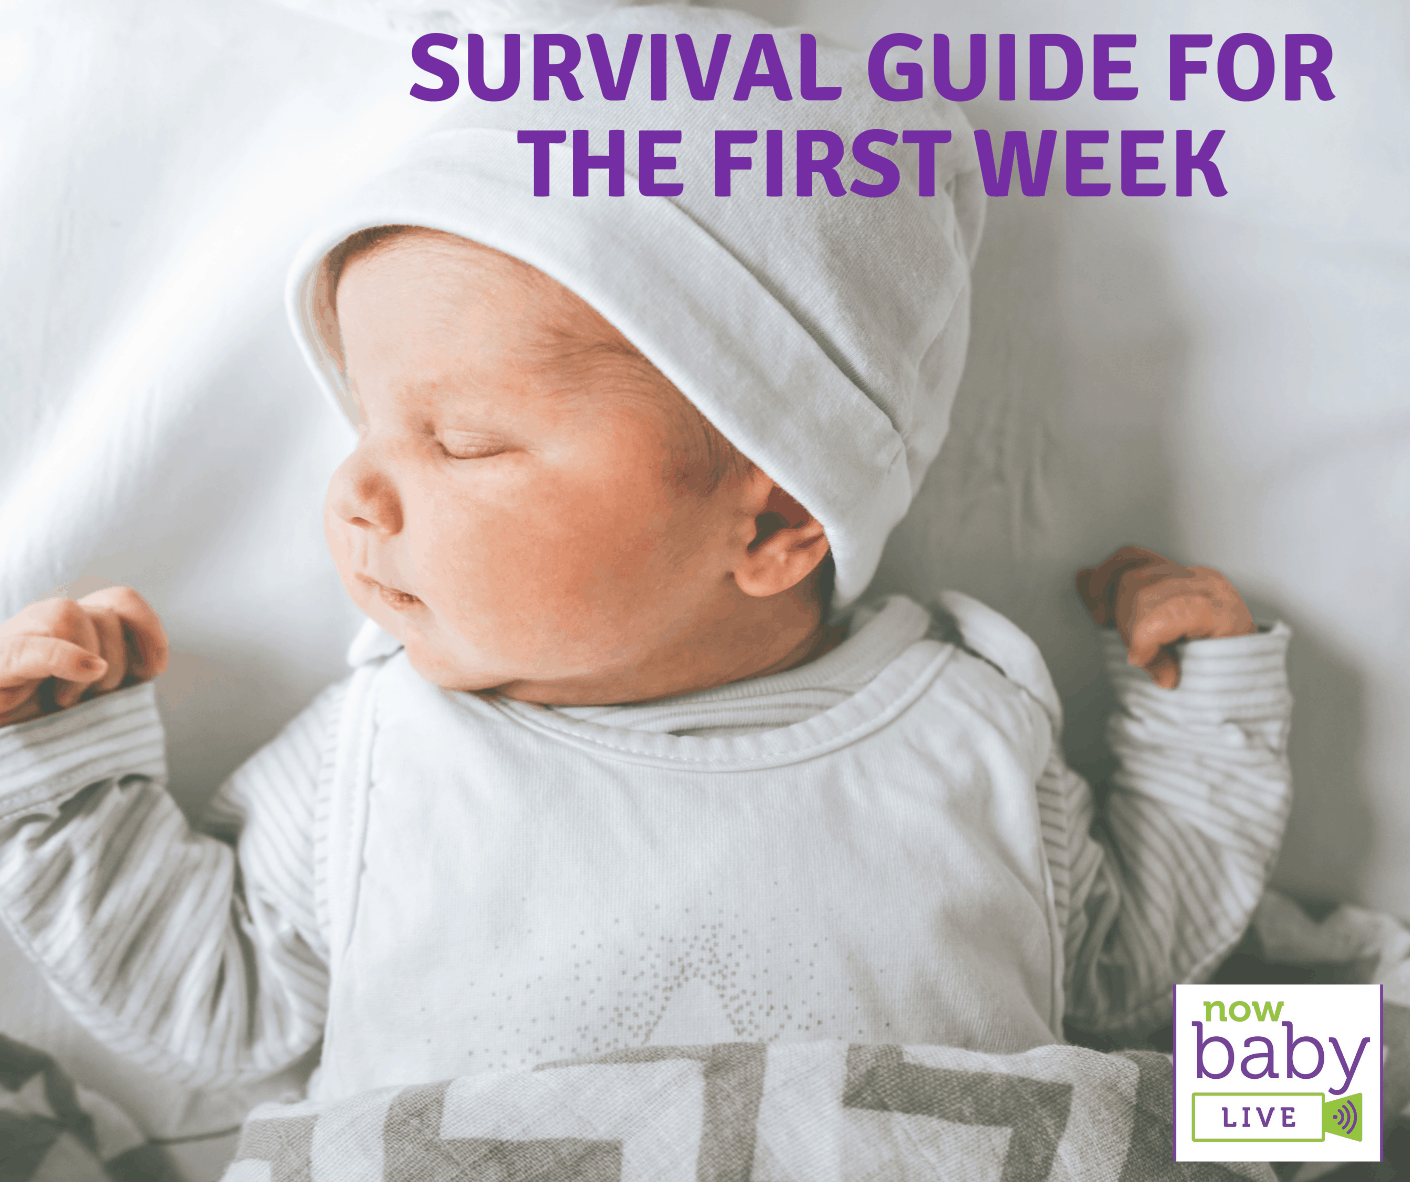 New baby? Your survival guide to the first week